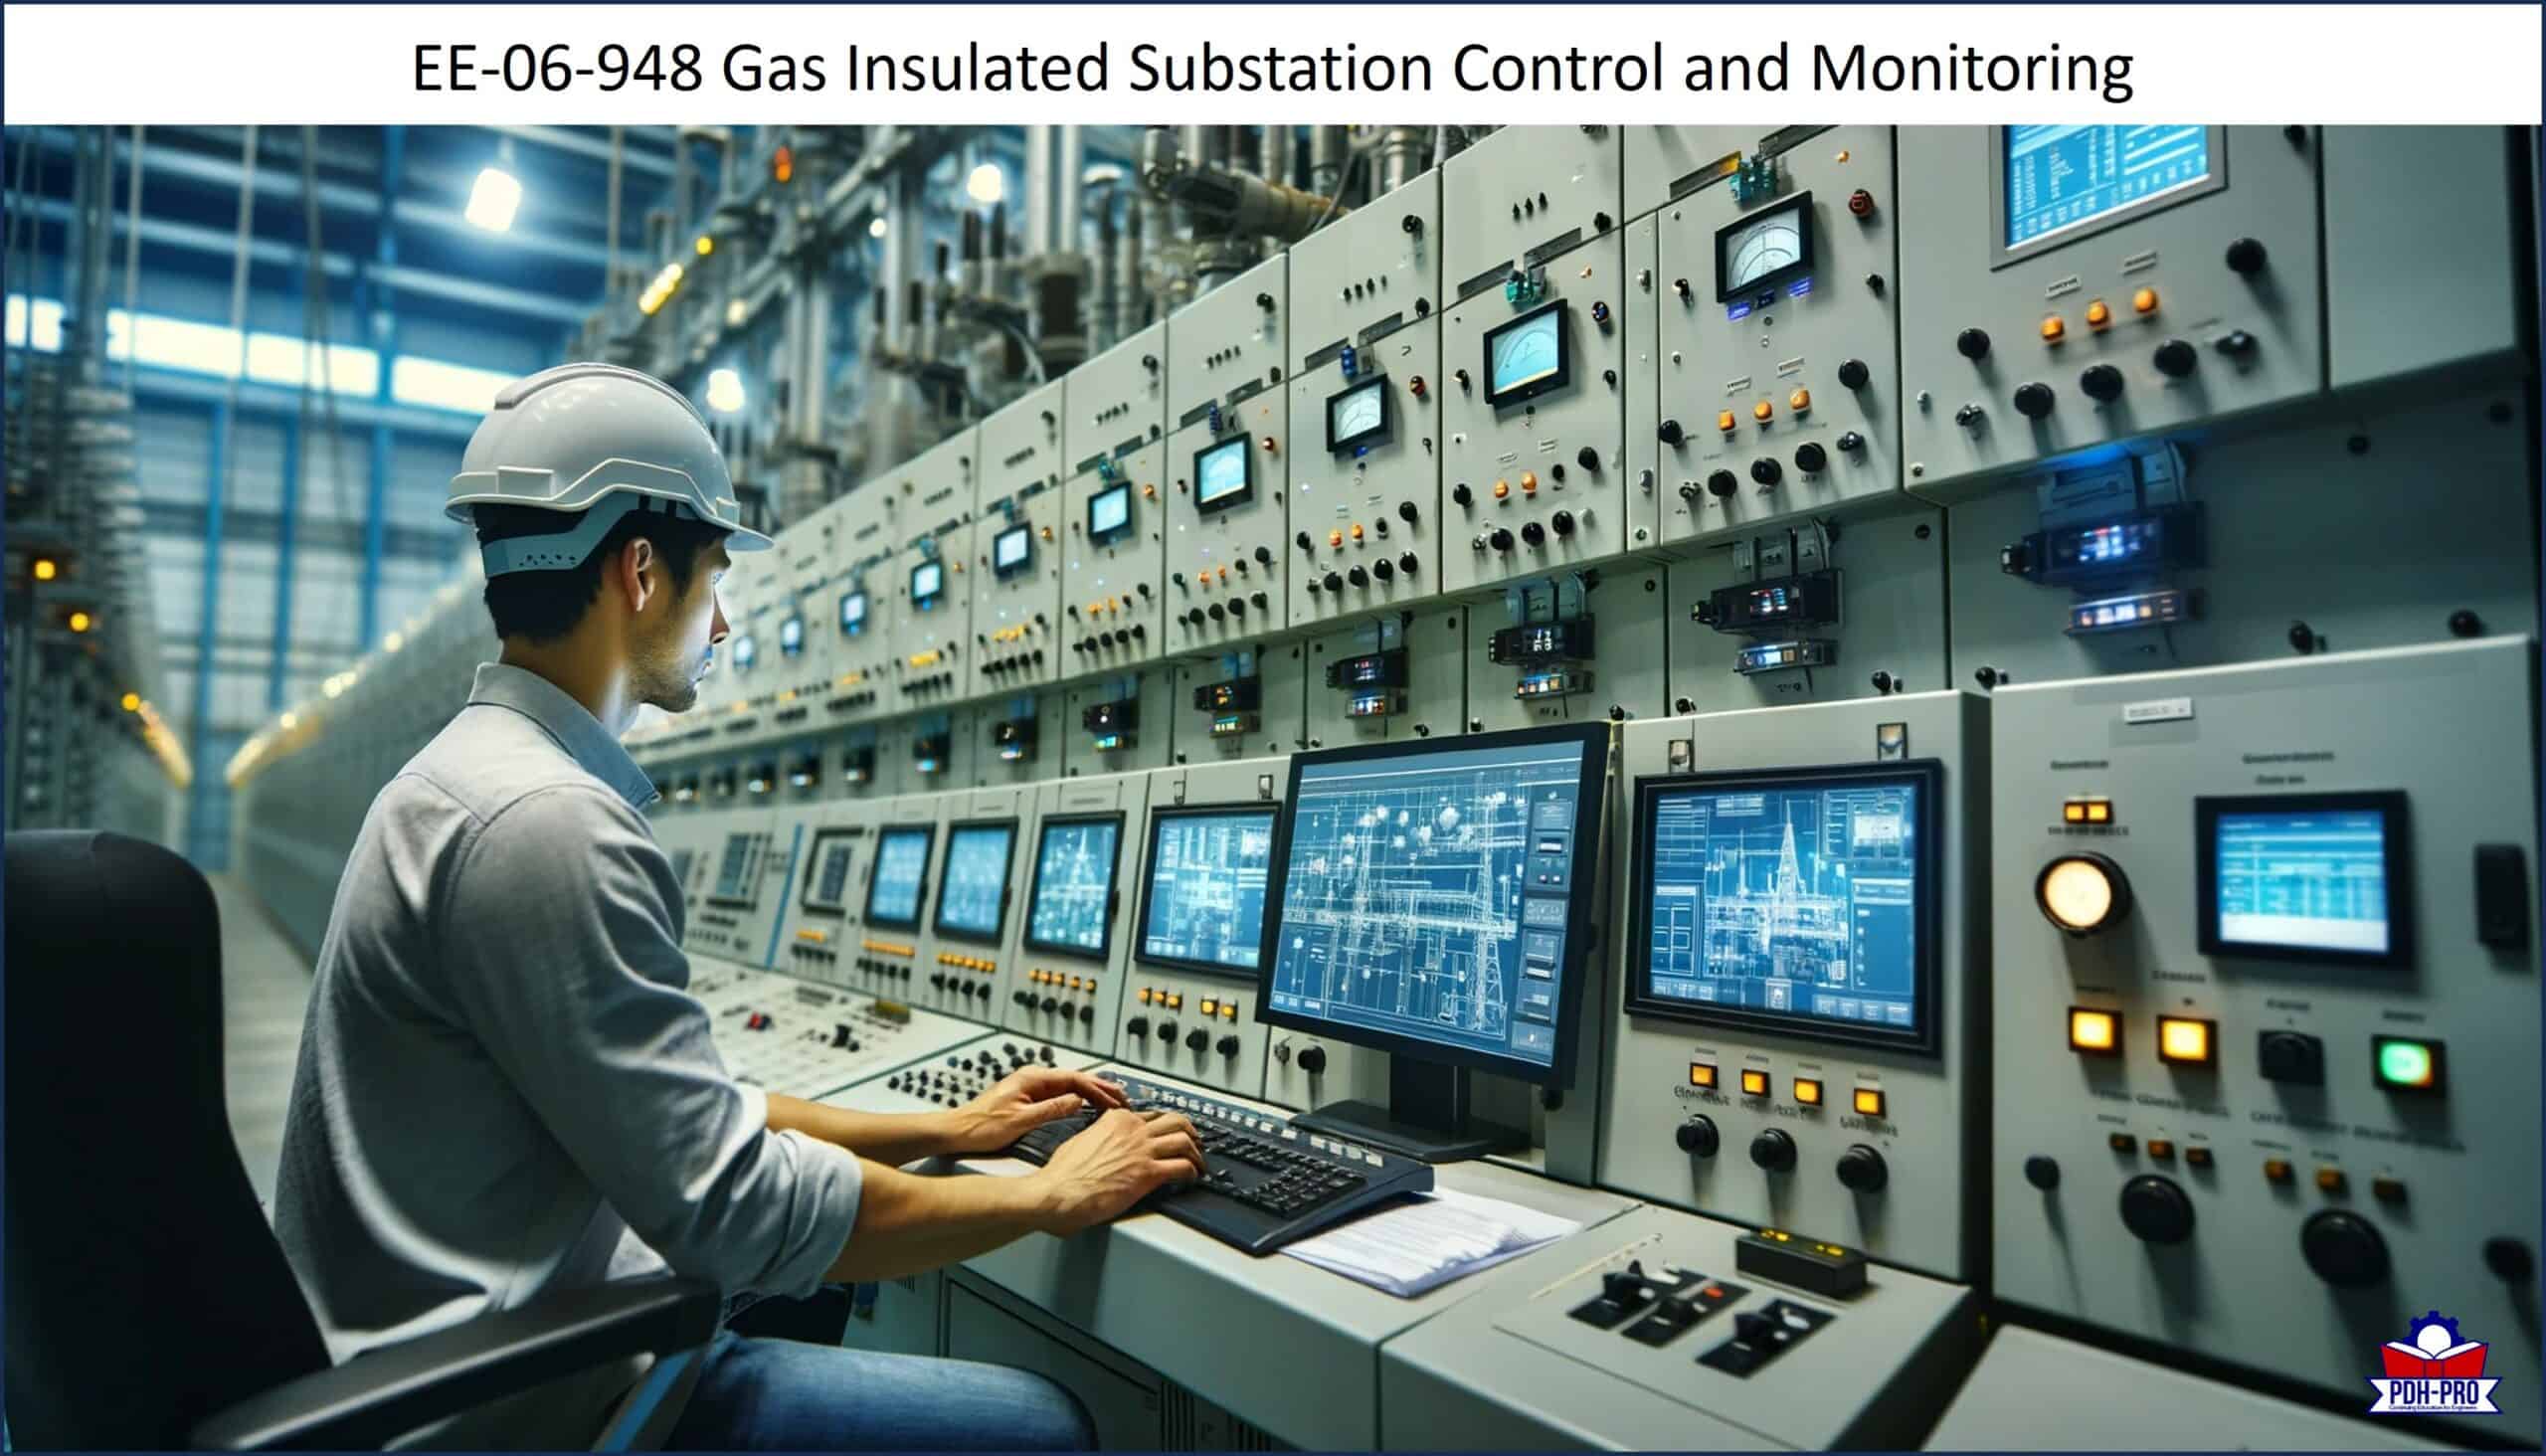 Gas Insulated Substation Control and Monitoring